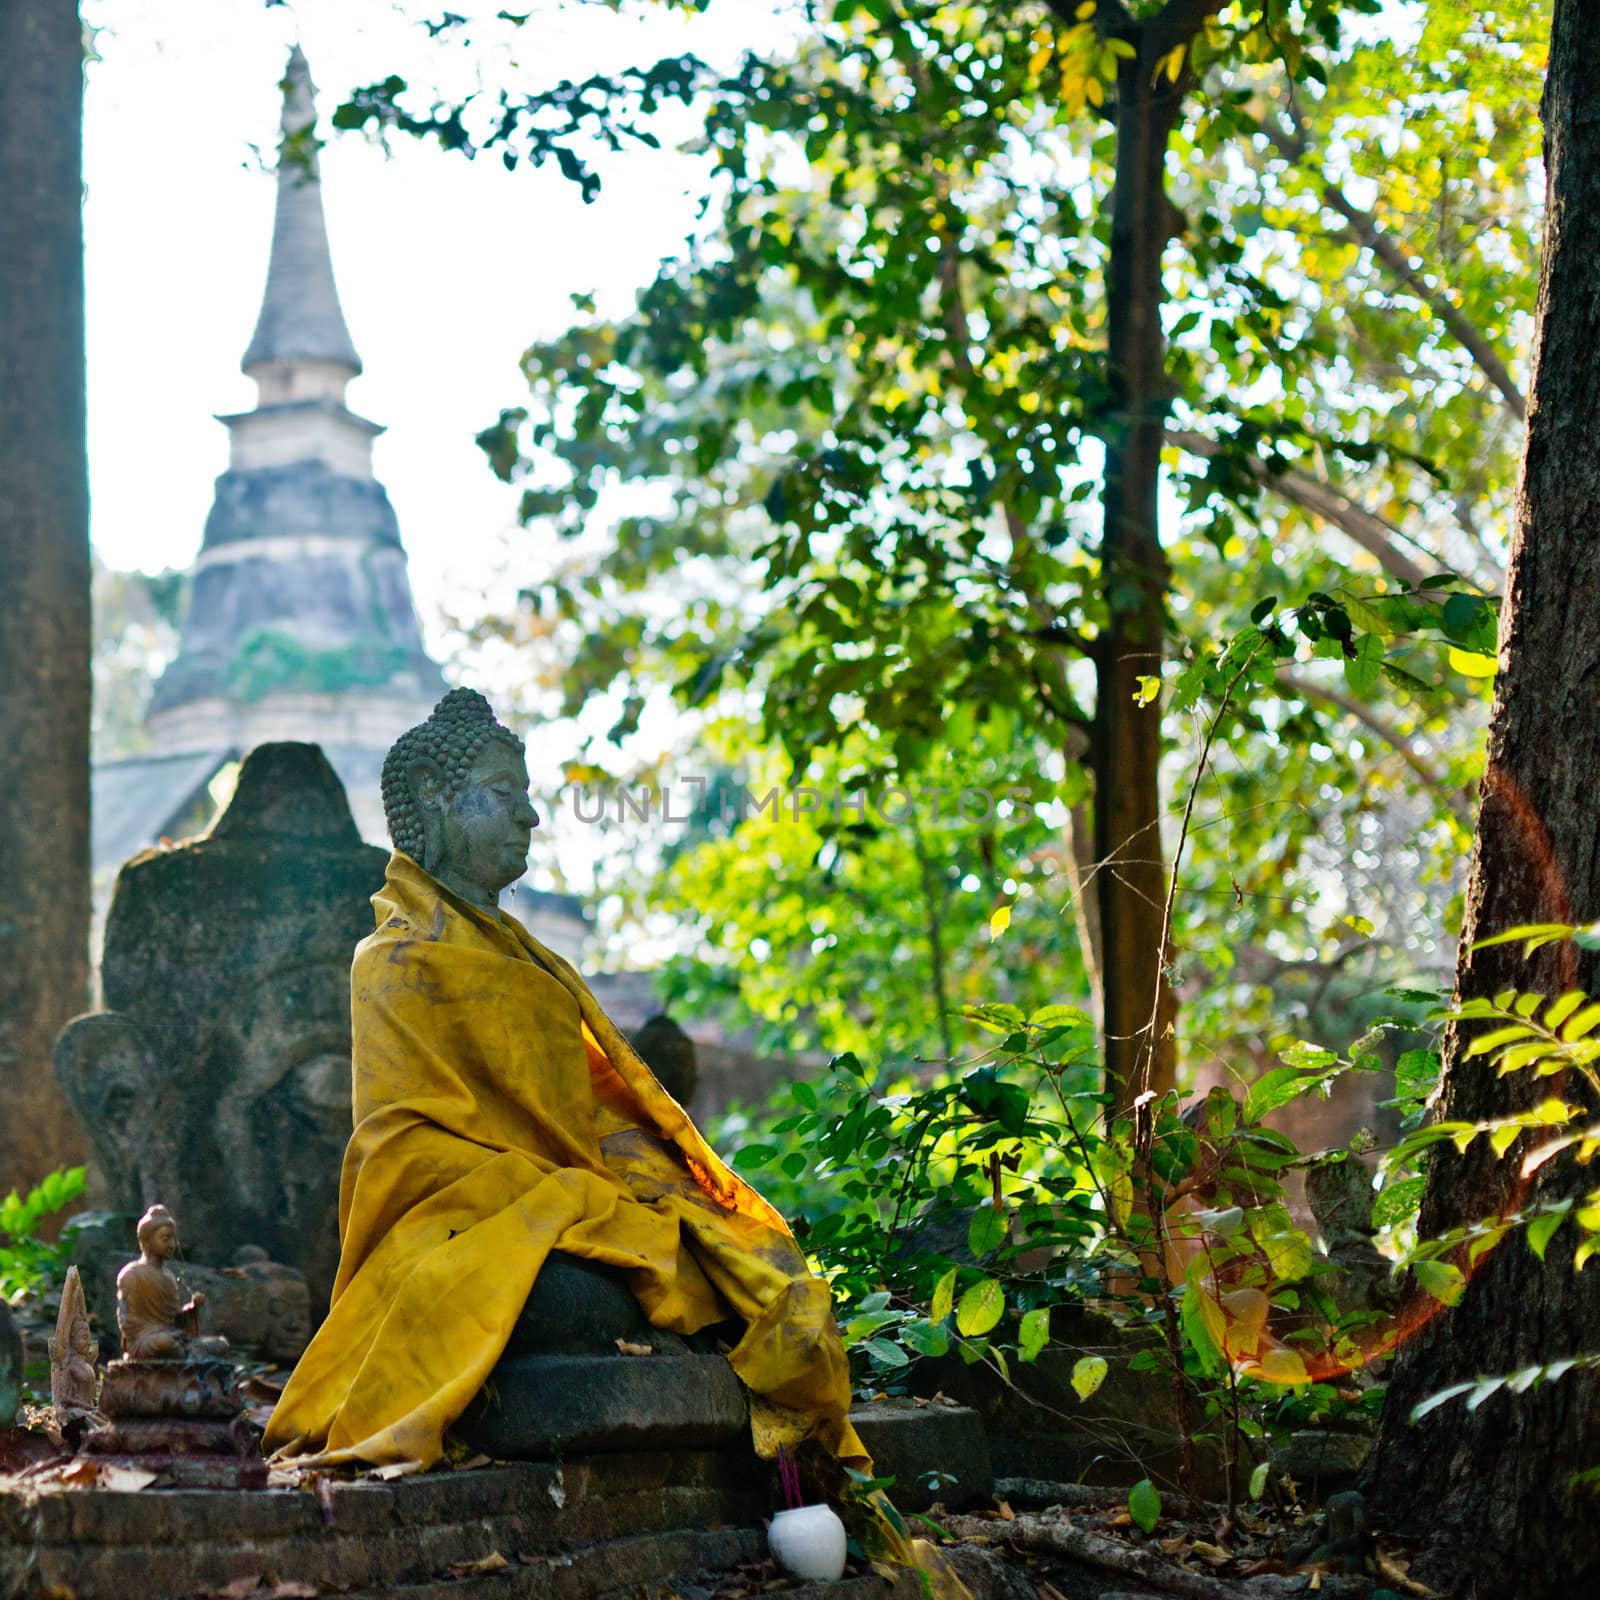 Statue of Buddha in the ancient temple in Chiangmai, Thailand